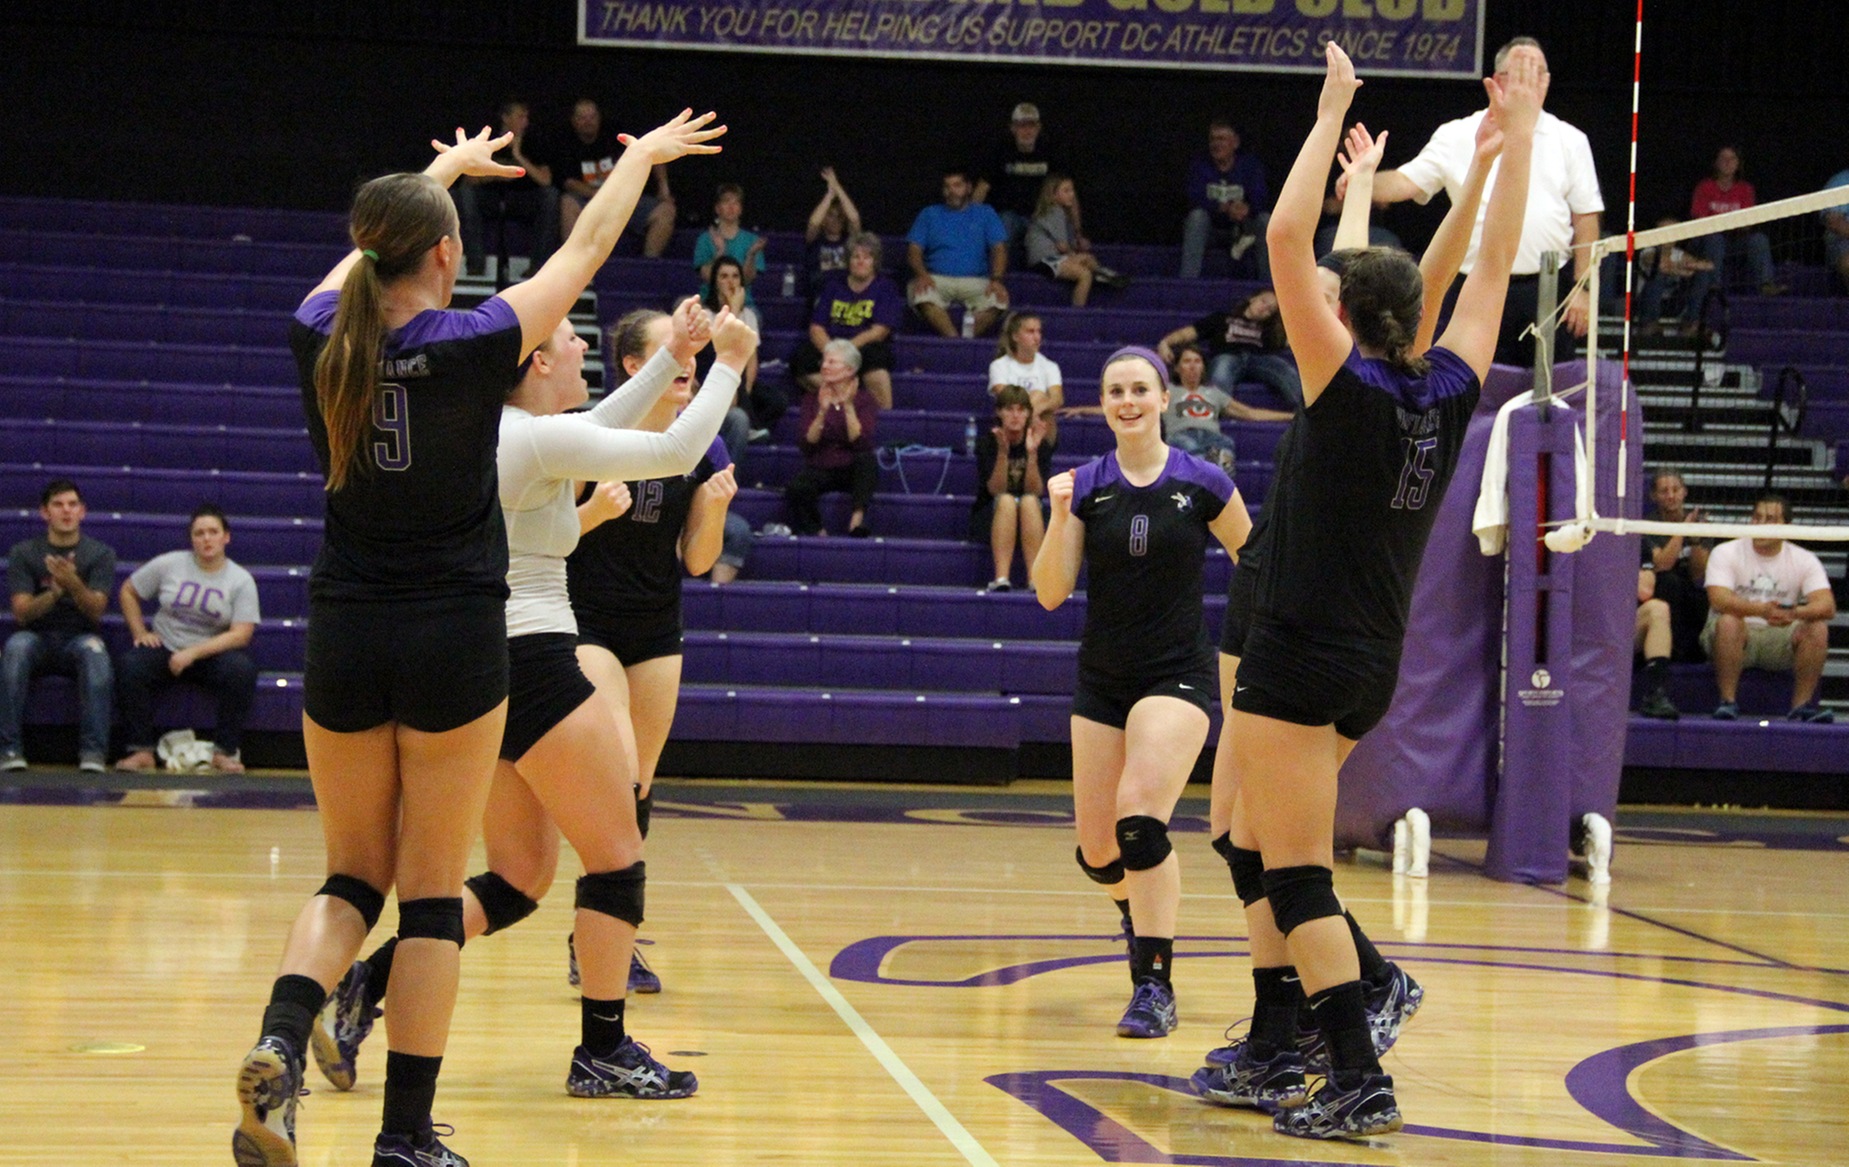 Lady Jacket volleyball ousts Earlham in Wednesday affair